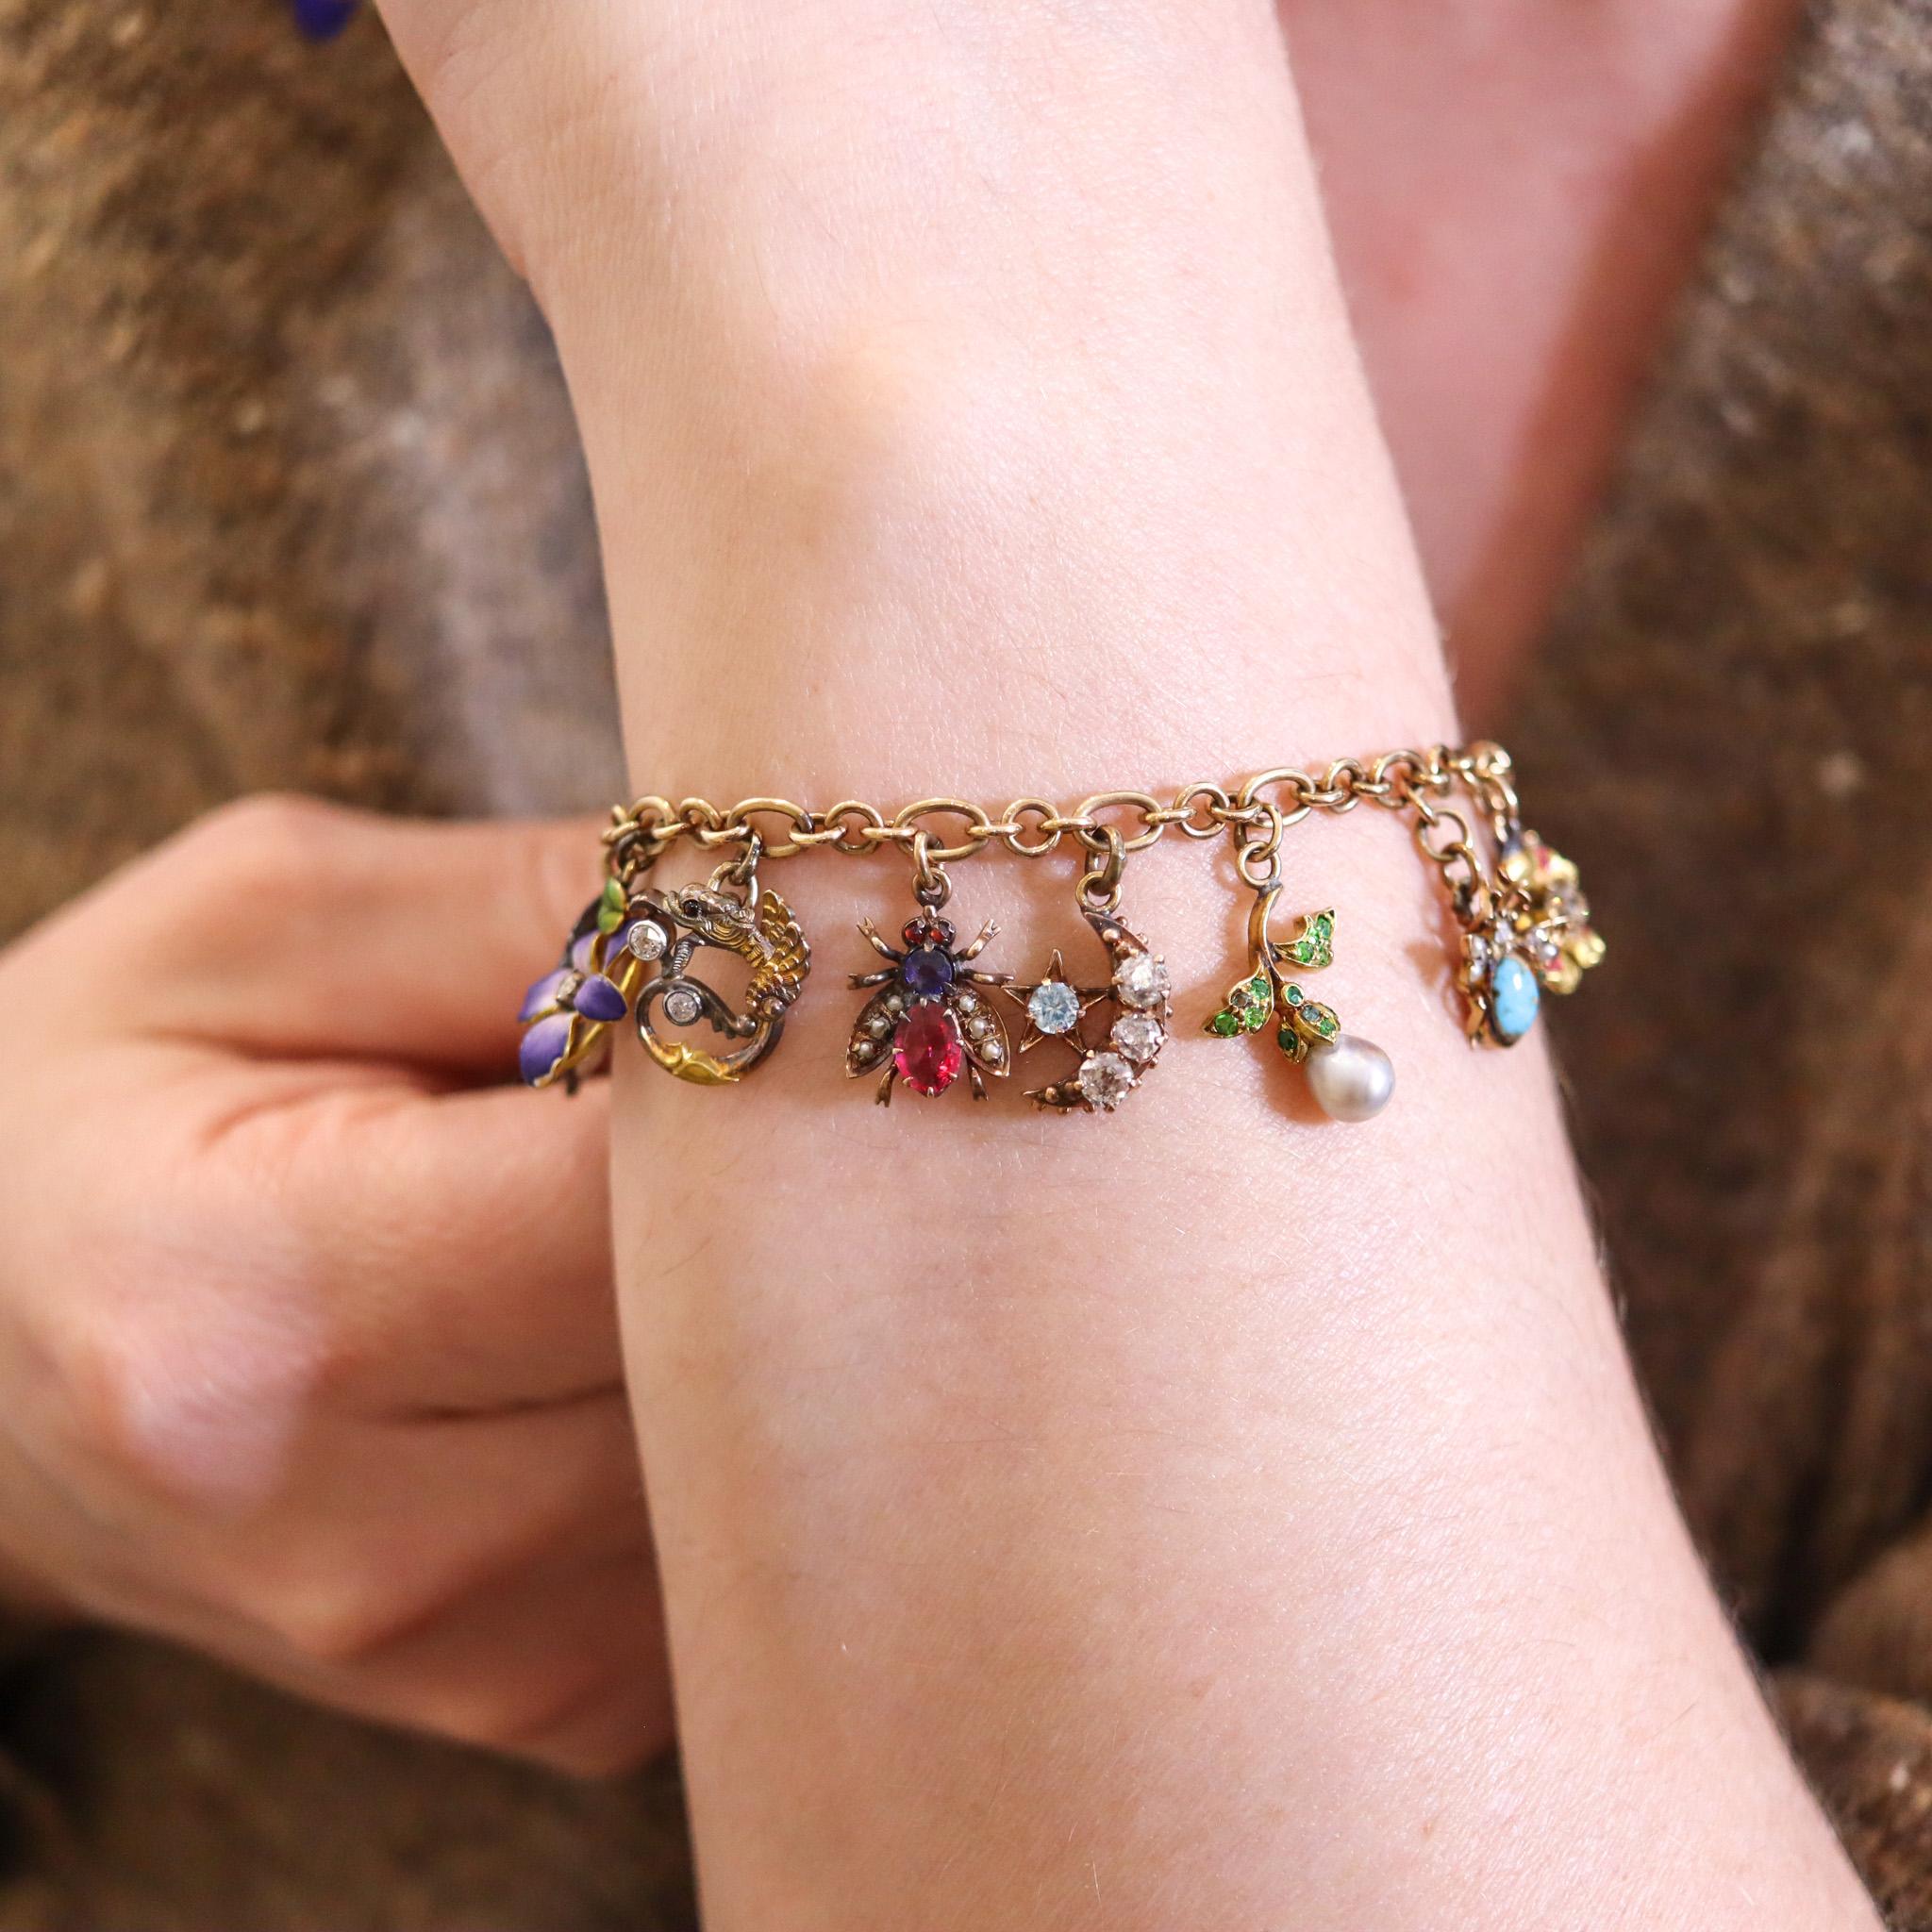 Art Nouveau 1910 Charms Bracelet In 14Kt Gold With Multi Gemstones And Enamels For Sale 4